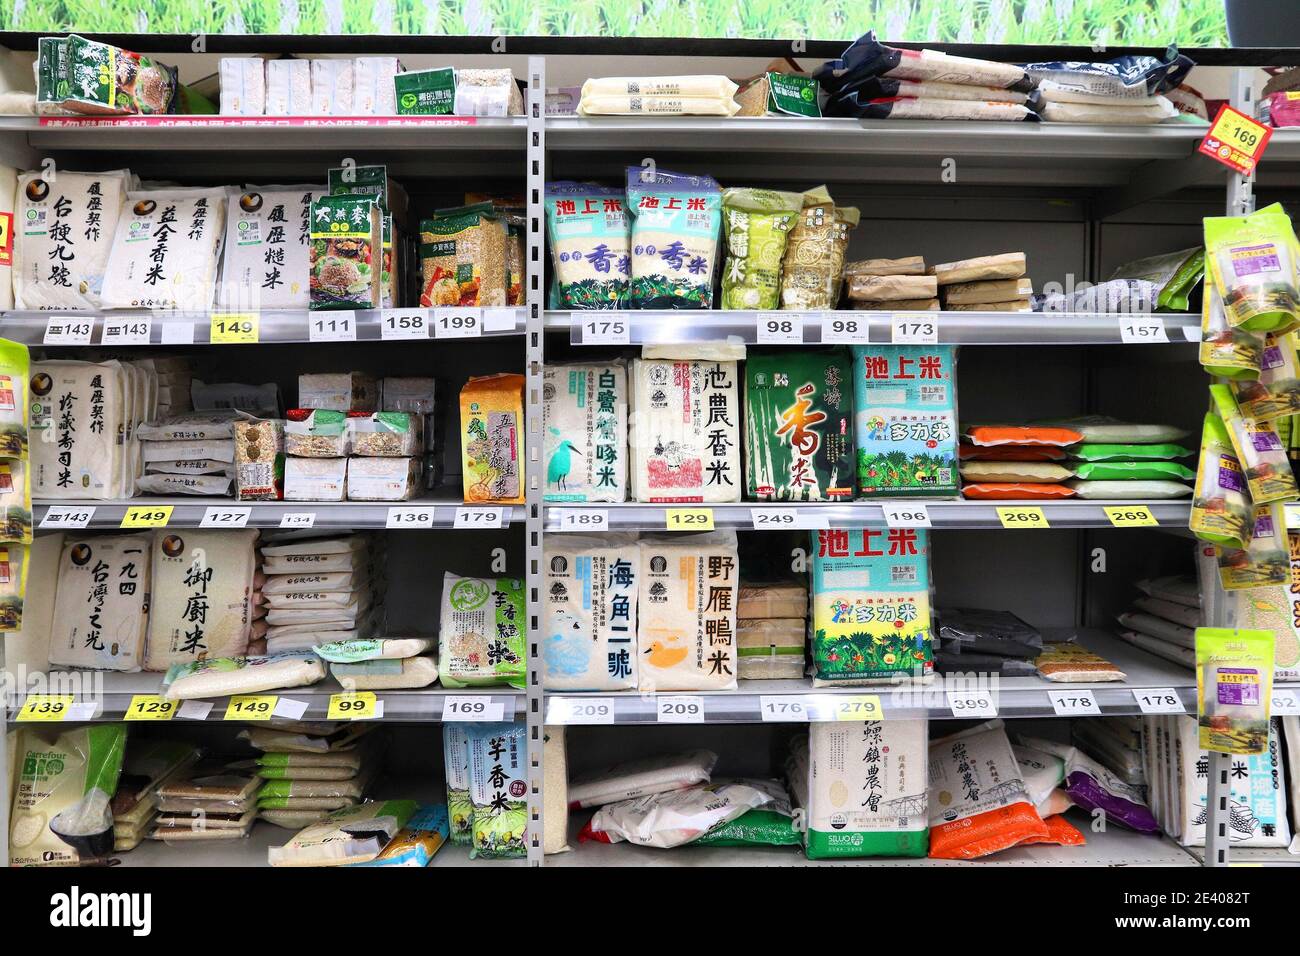 TAIPEI, TAIWAN - DECEMBER 3, 2018: Rice varieties in a supermarket in Taipei, Taiwan. Taipei is the most populous city and capital city of Taiwan. Stock Photo